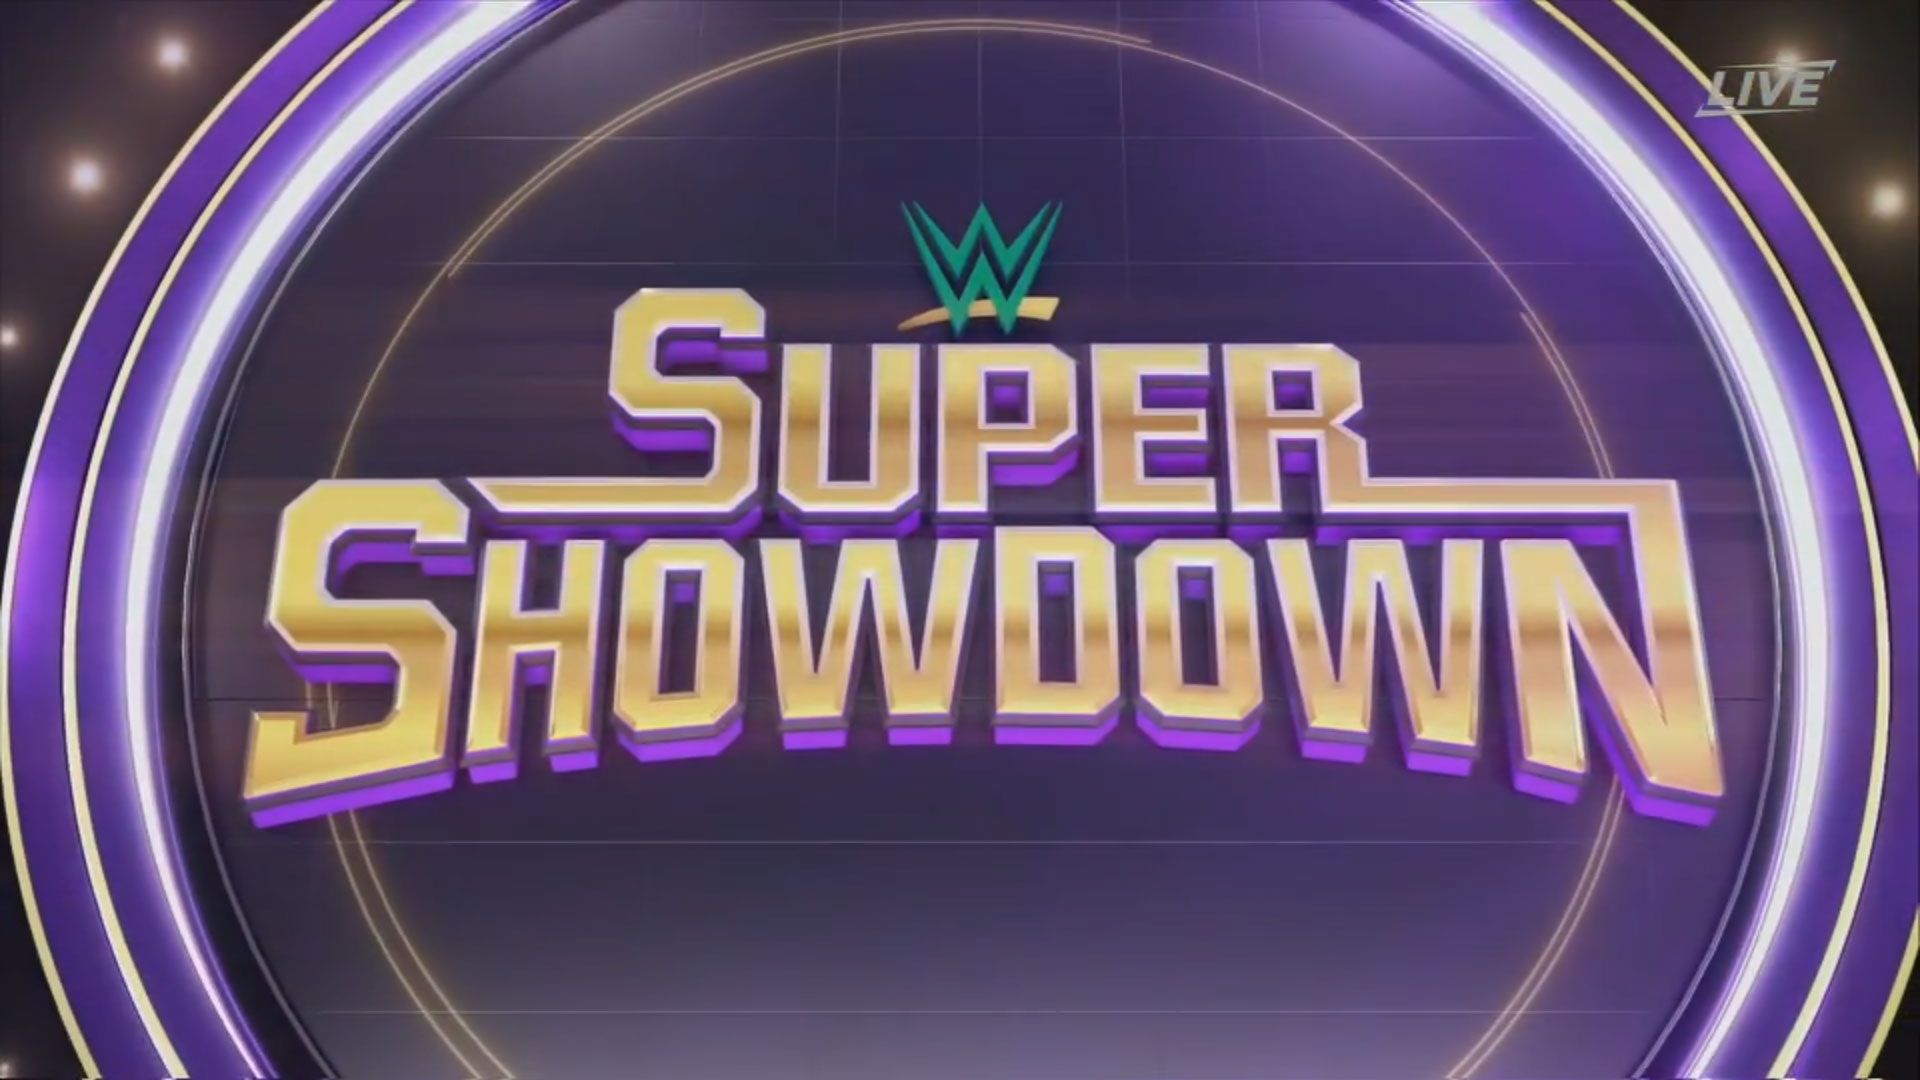 WWE Super Showdown 2020 Review and Match Ratings